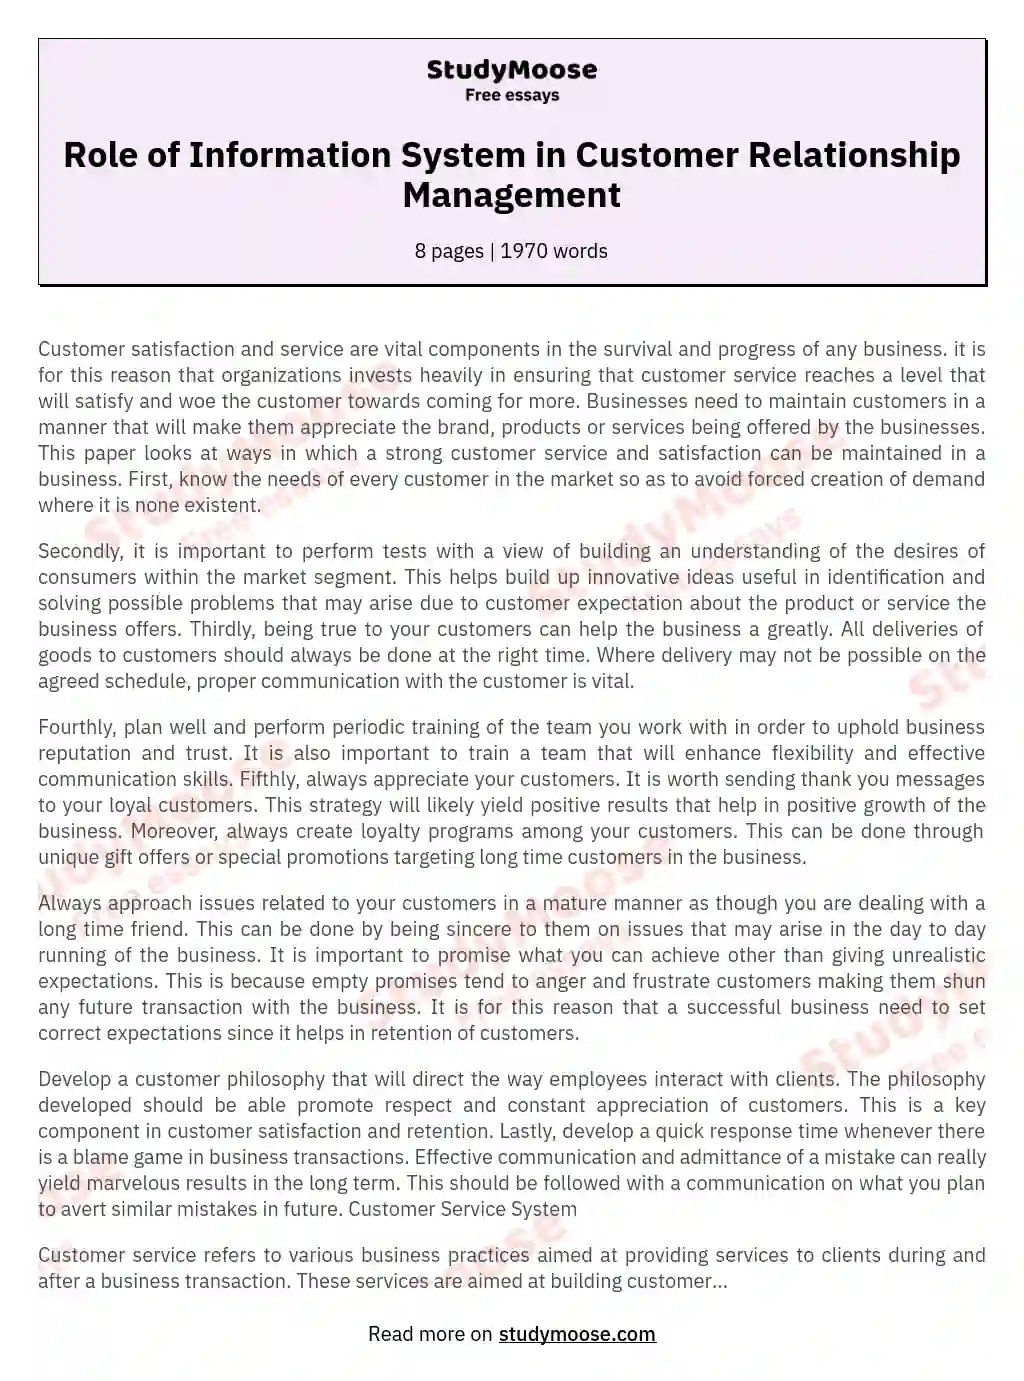 Role of Information System in Customer Relationship Management essay